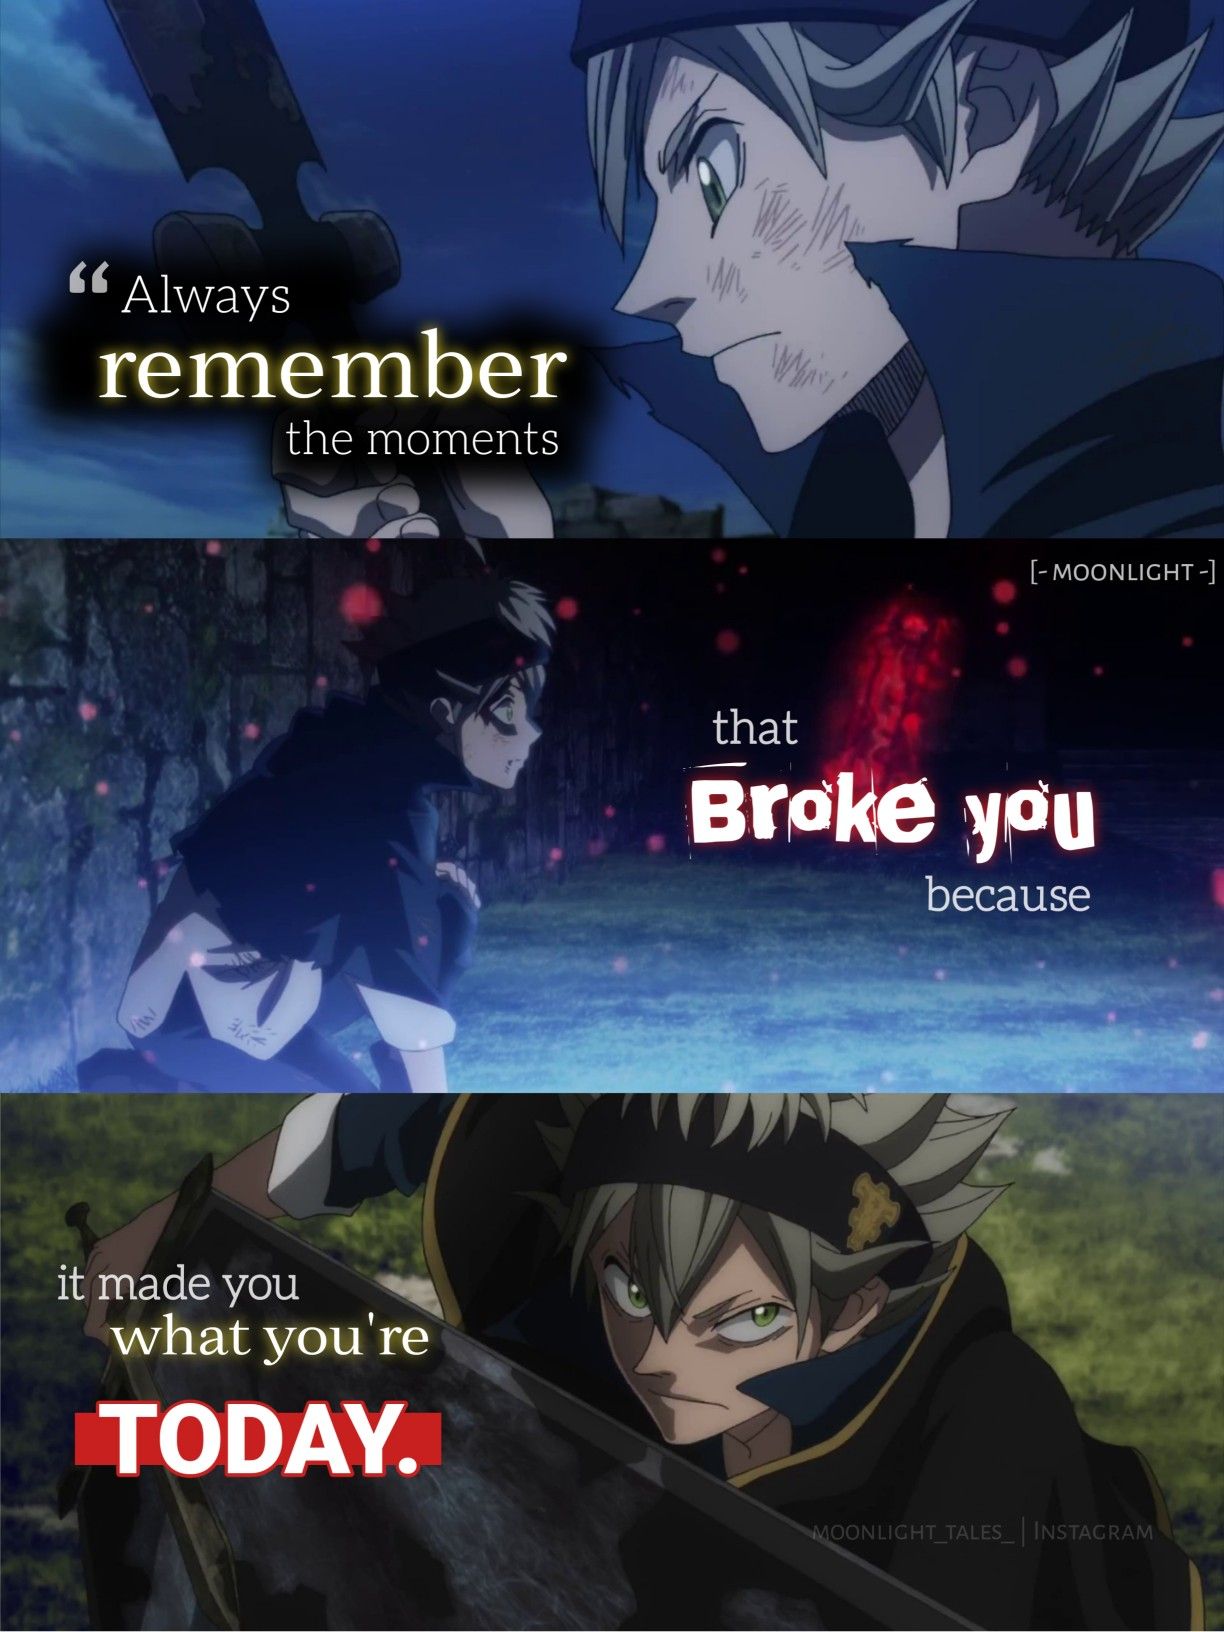 Black clover quote. Anime quotes inspirational, Anime quotes, Manga quotes